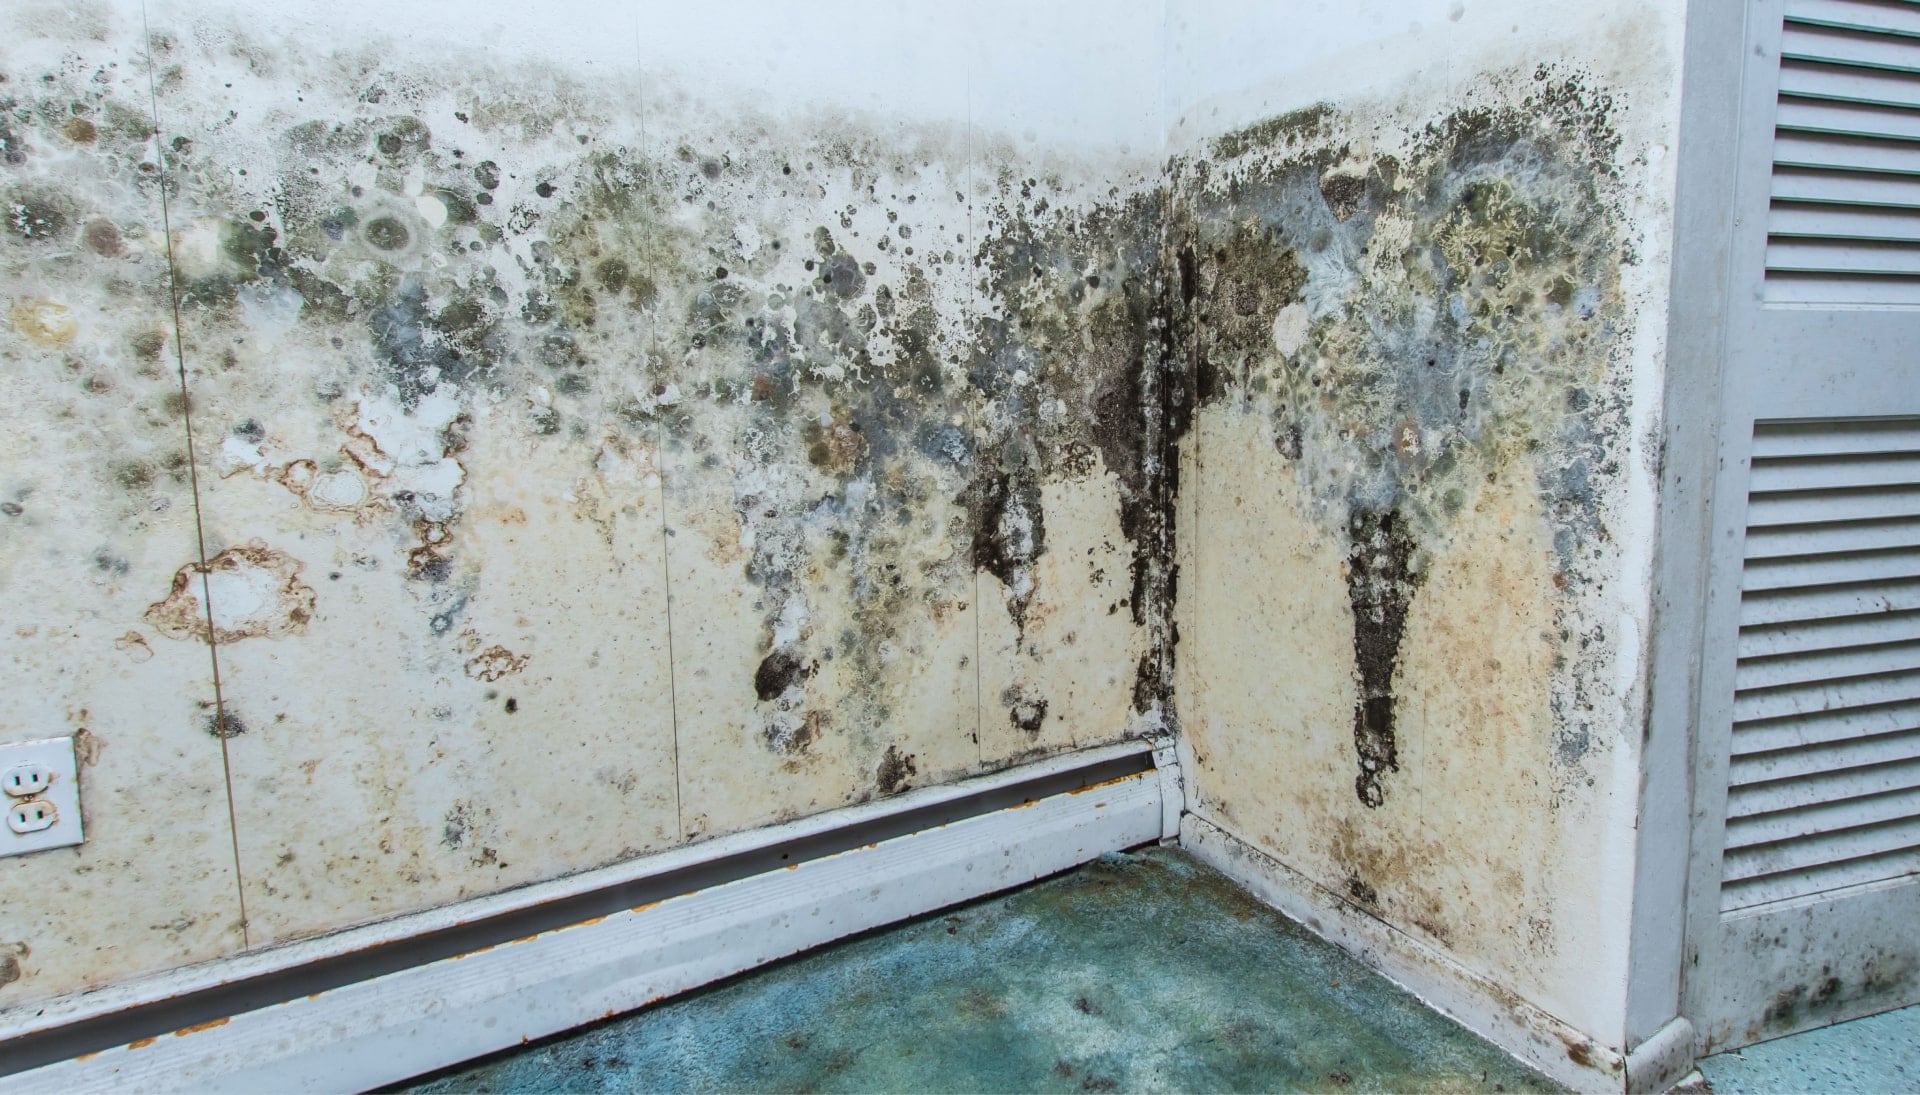 Professional mold removal, odor control, and water damage restoration service in Brooklyn, New York.